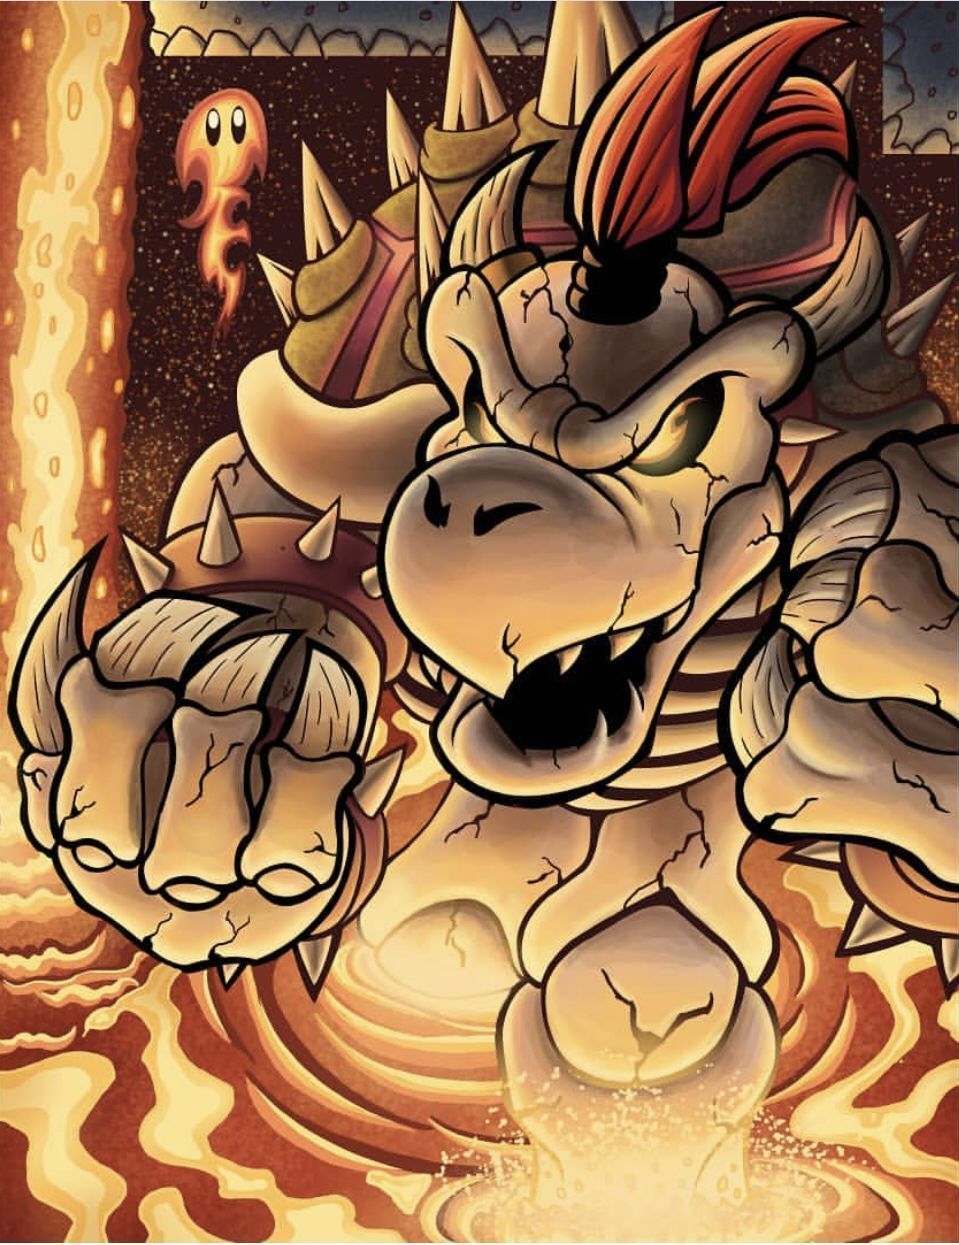 A small ghost floats above a pair of Bowser's minions, who are being consumed by flames. - Bowser